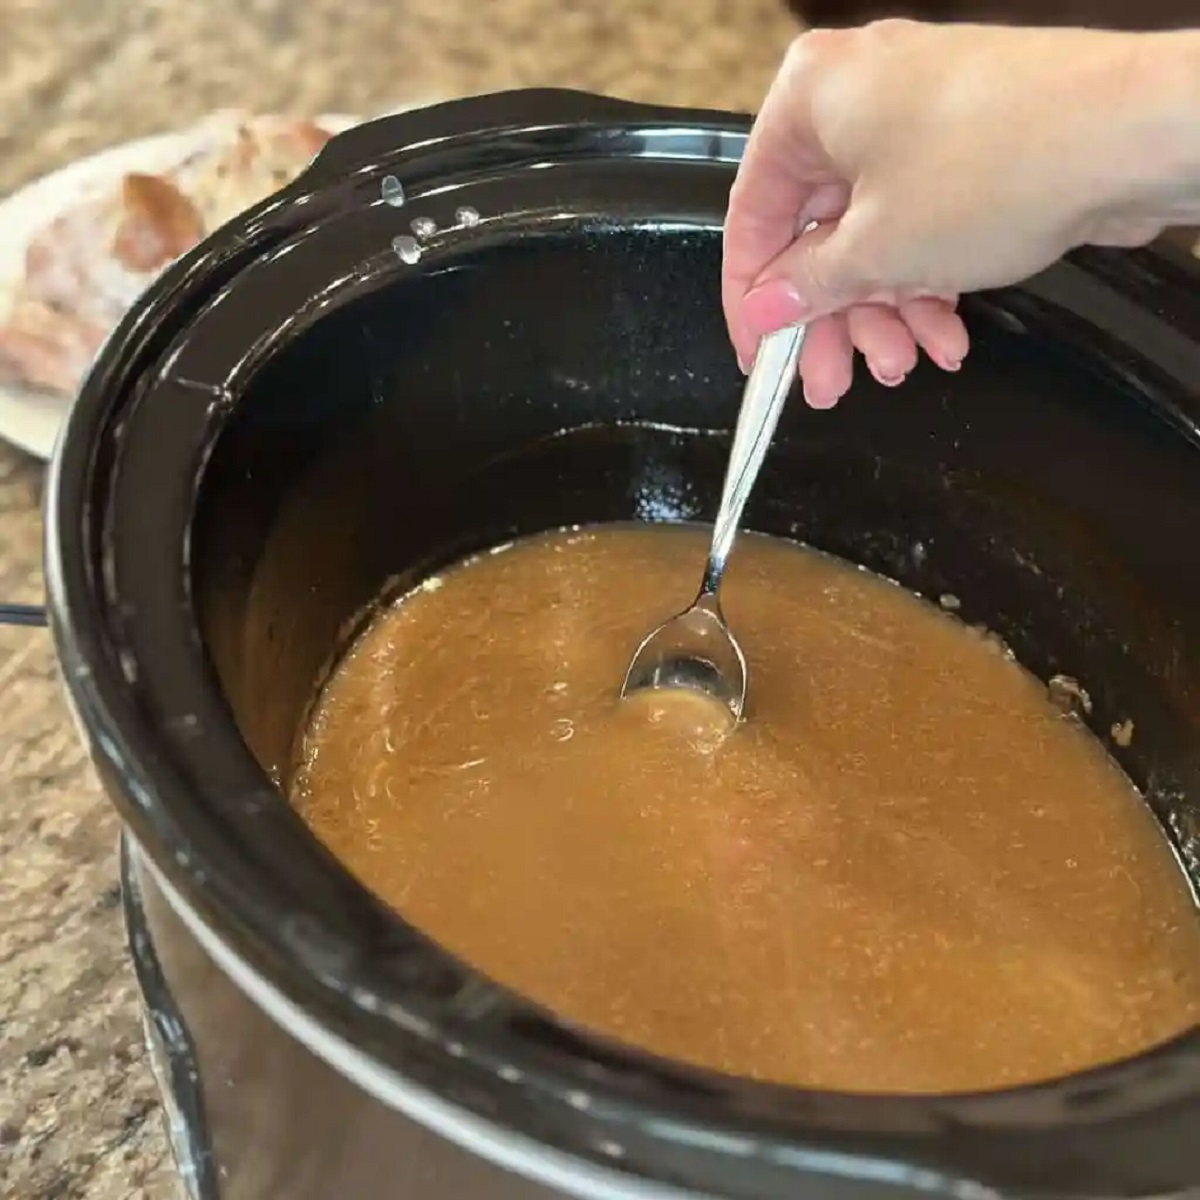 How To Make Gravy From Leftover Meat Juice Using A Slow Cooker | Storables